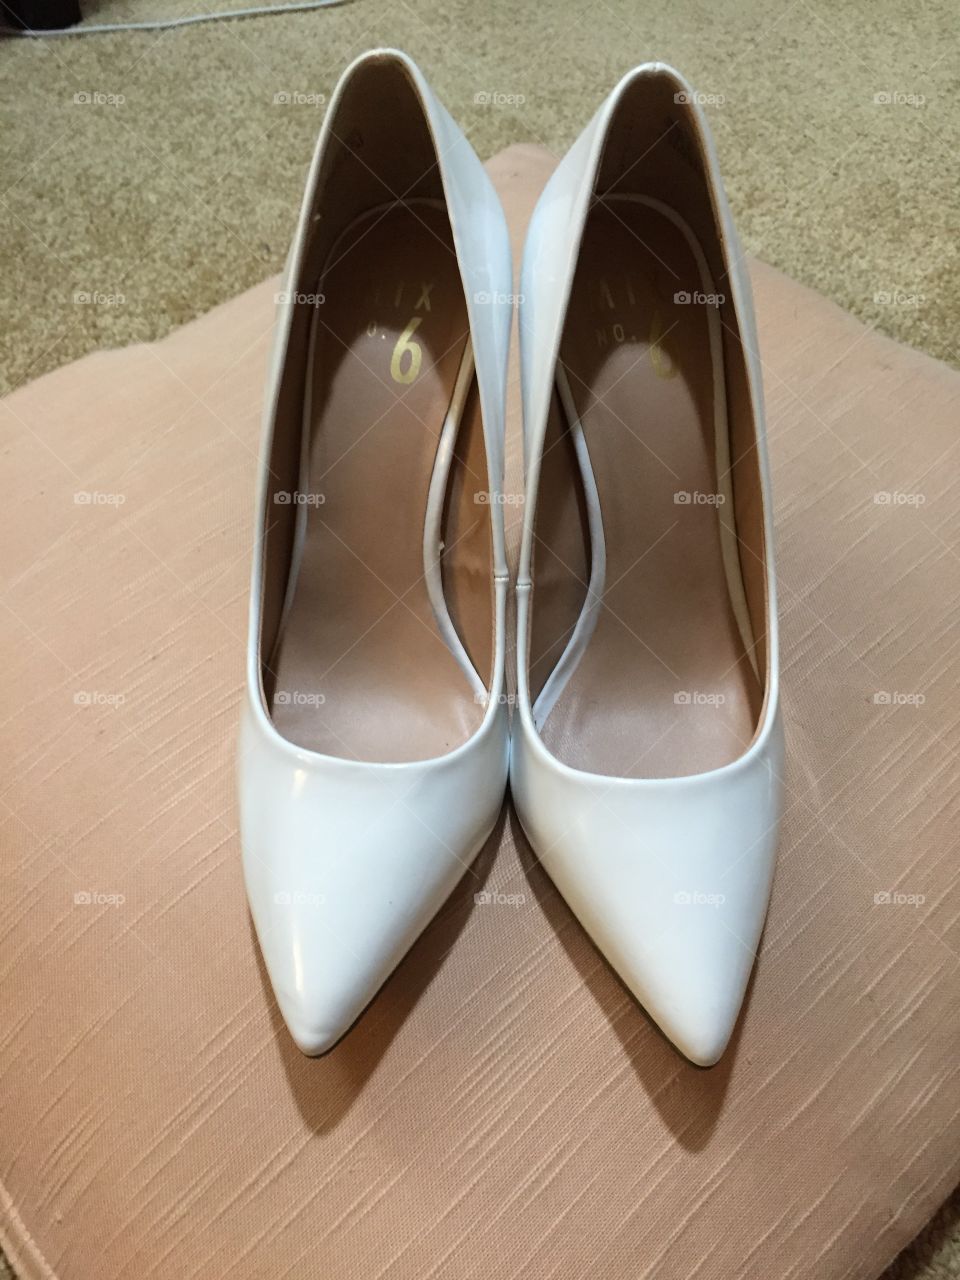 High heels, pump, white heels, white shoes, classy, classic, pointy toes, white, 4 inches 